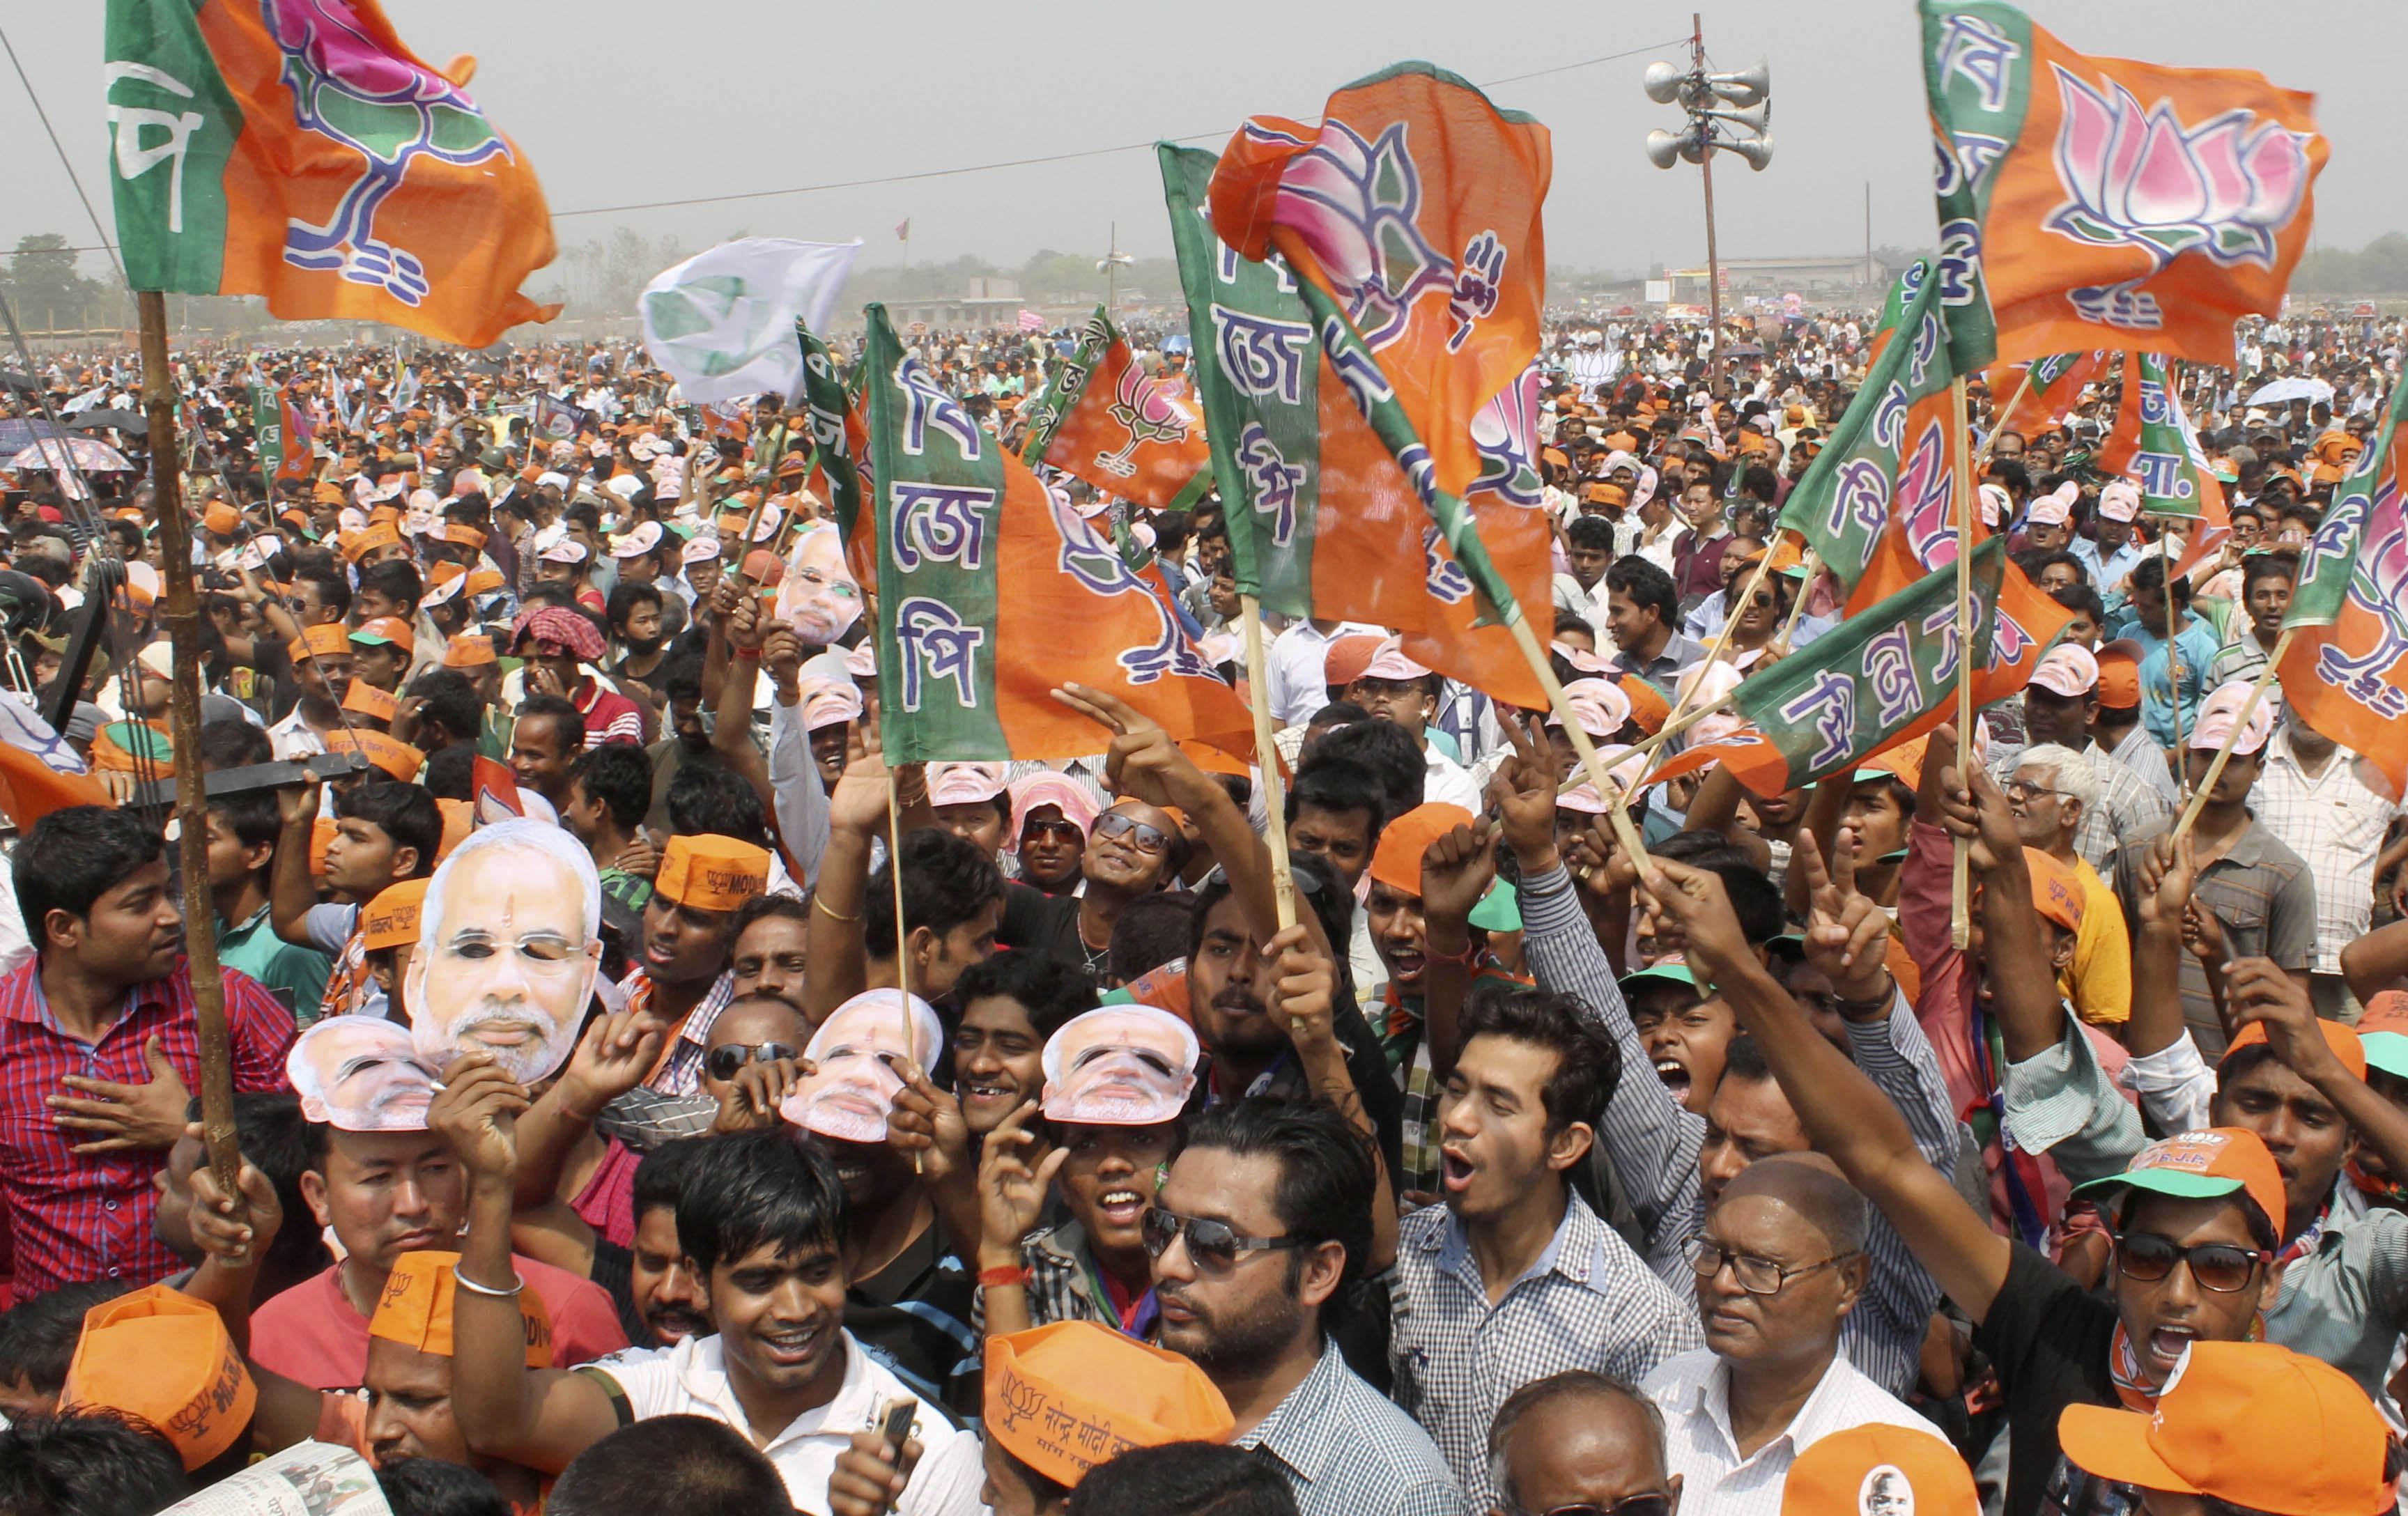 A rally for BJP Prime Ministerial candidate Narendra Modi in Siliguri, Darjeeling, on April 10, 2014. Voter mobilization, campaigning and advertising costs have made this the most expensive Indian poll ever (Hindustan Times&mdash;Hindustan Times via Getty Images)